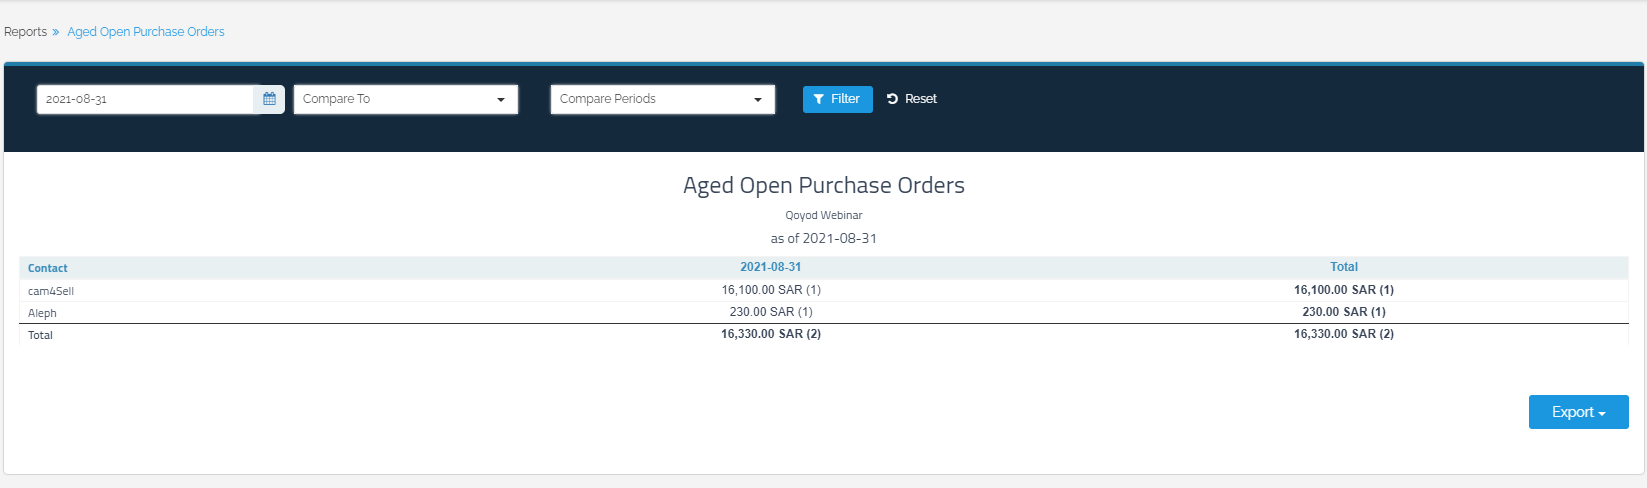 Aged Open Purchase Orders - Qoyod